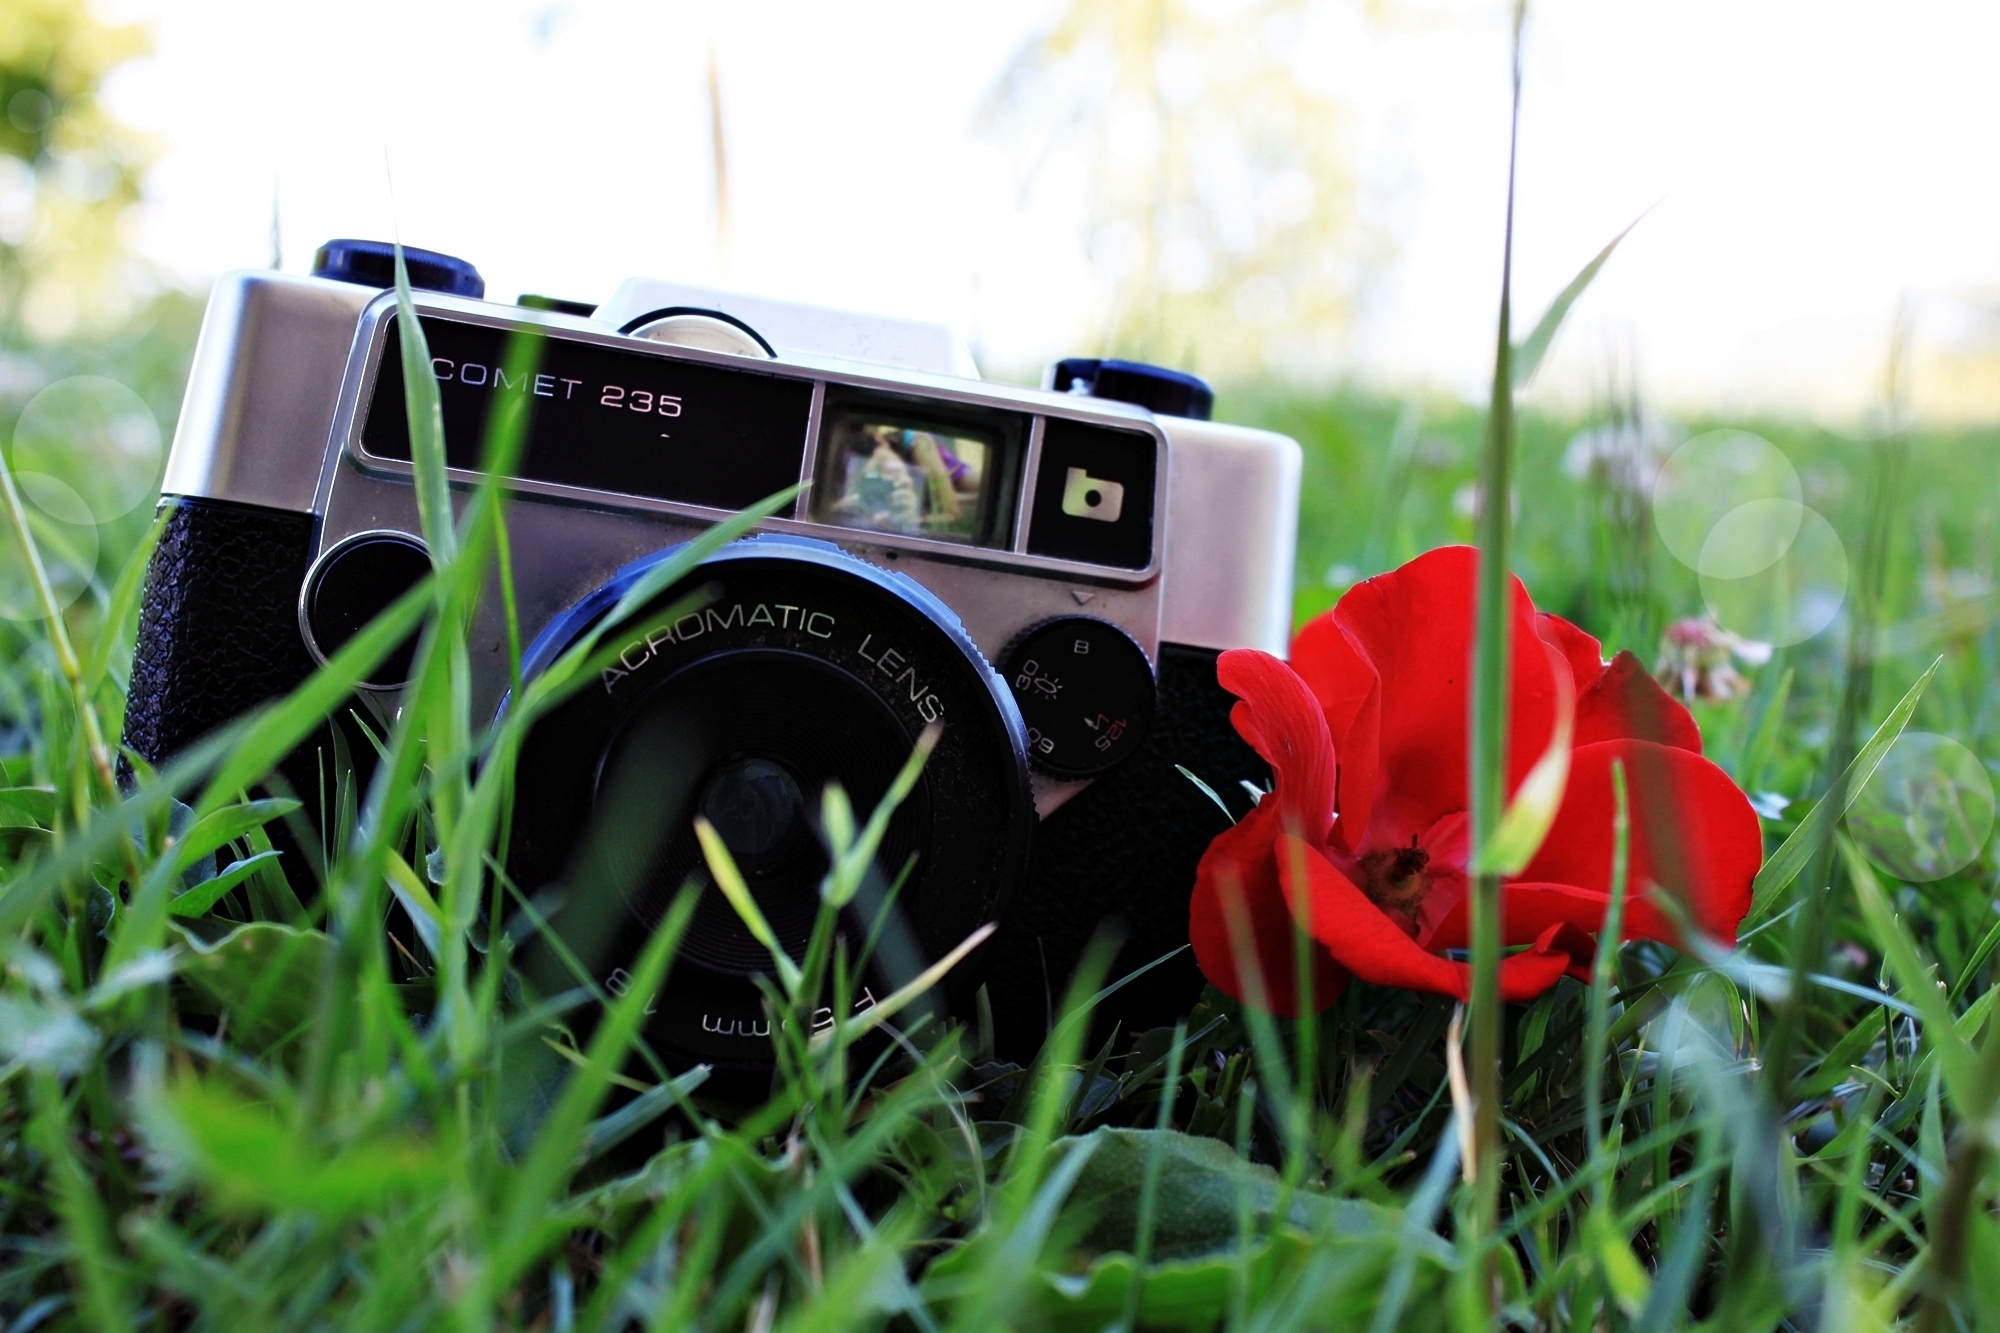 lens, grass, background, red, flower, plant, miscellanea, miscellaneous, mood, camera, poppy, floweret, moods